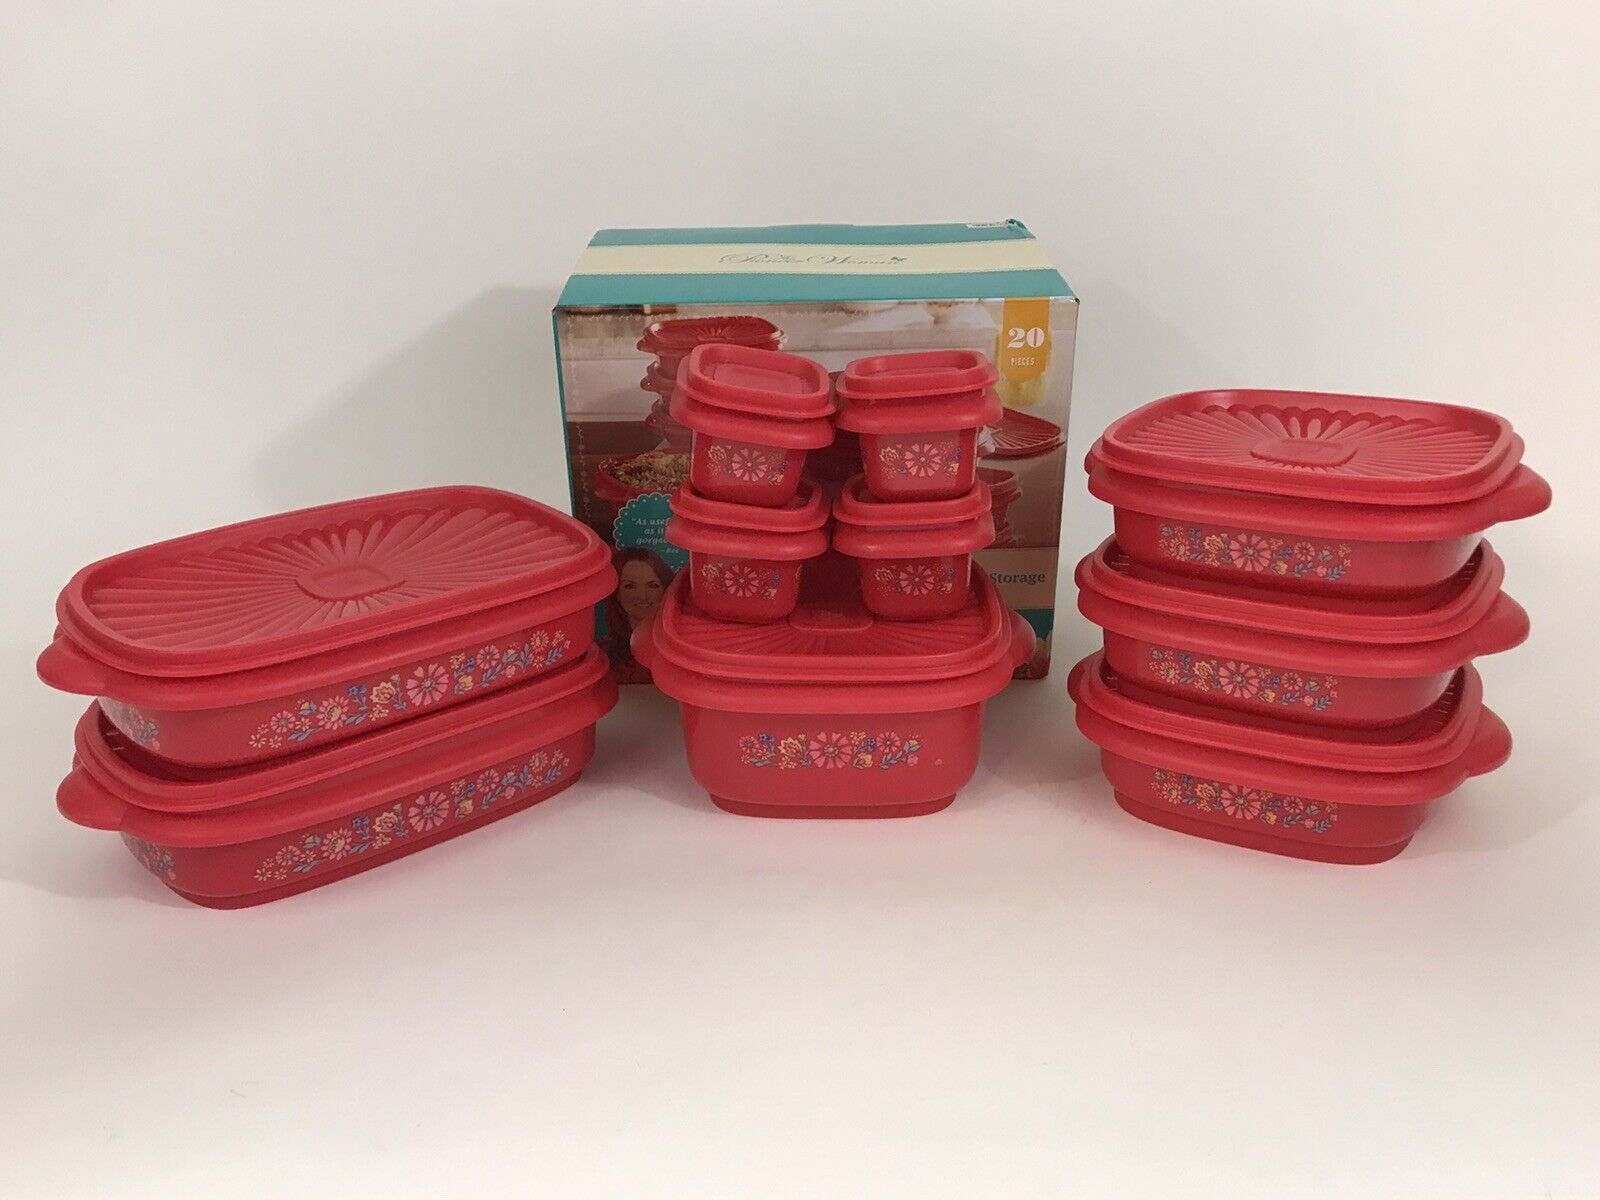 The Pioneer Woman 20 Piece Food Storage Containers Red Maize Set with Lids NEW